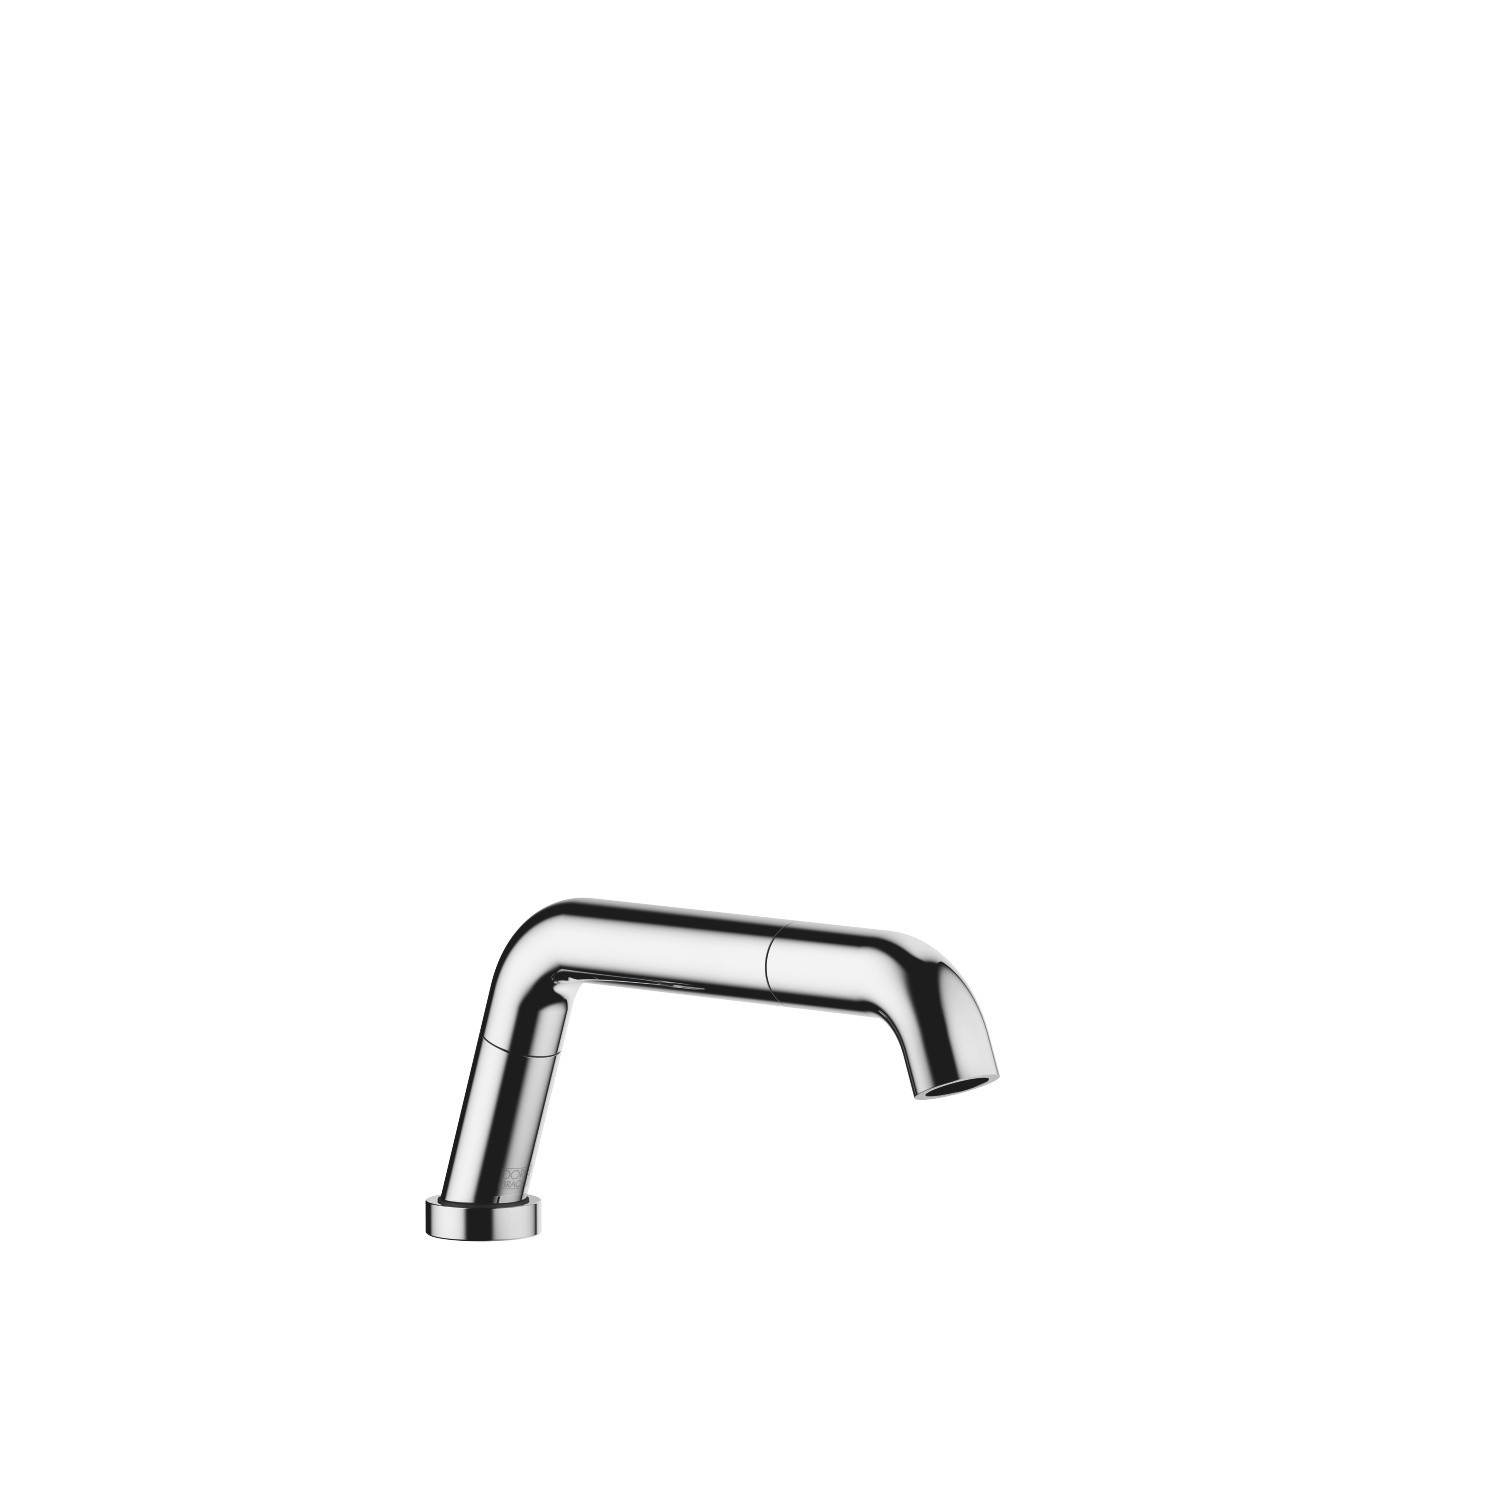 DORNBRACHT 27728973 2.5 GPM DECK MOUNT AFFUSION PIPE HAND SHOWER FOR KNEIPP TREATMENTS